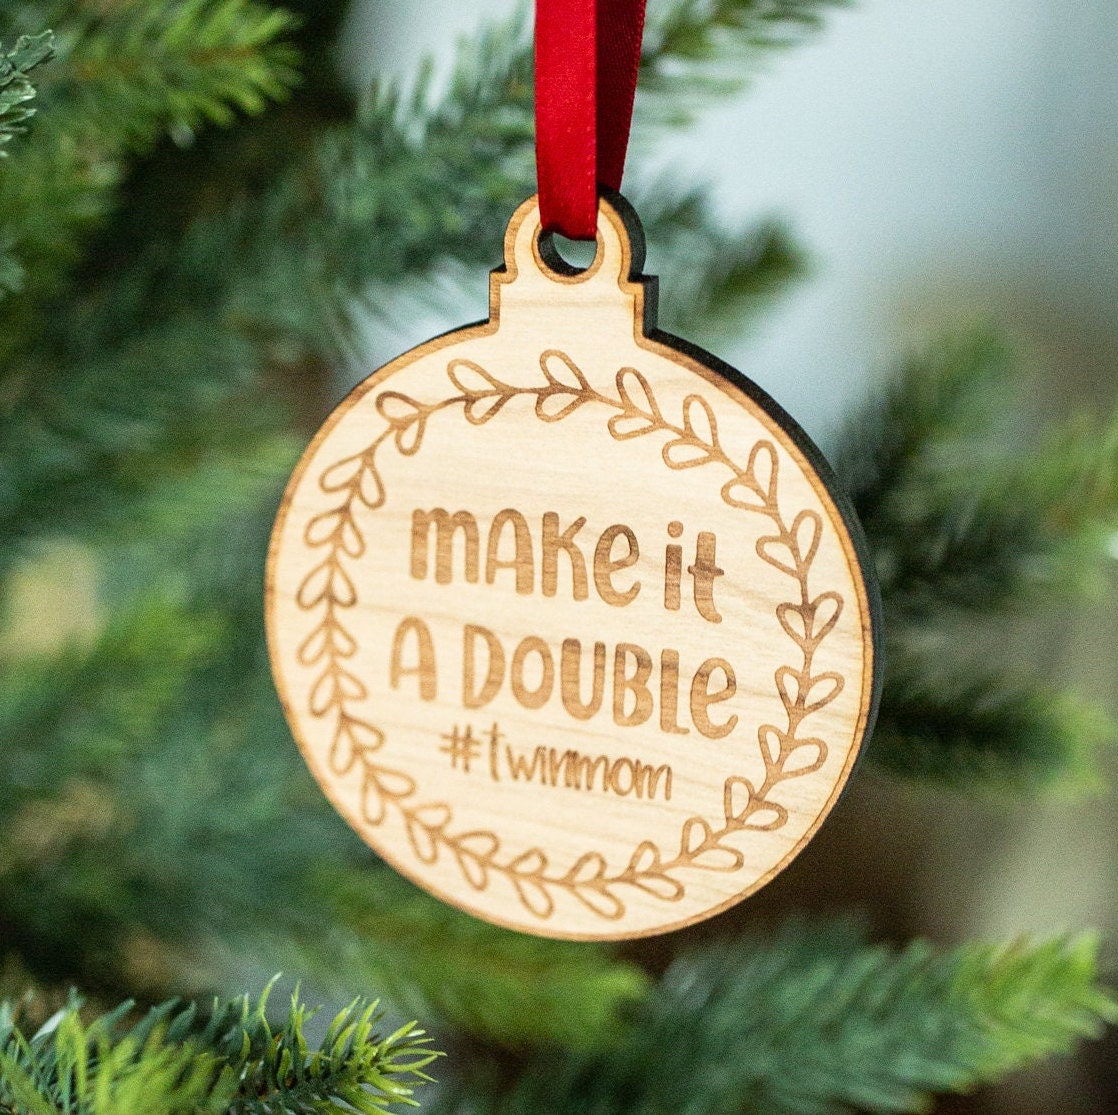 https://3cetching.com/wp-content/uploads/2021/10/make-it-a-double-twinmom-engraved-wooden-funny-christmas-ornament-charm-funny-christmas-gift-for-mom-funny-holiday-gift-ornament-for-mom-61701892.jpg